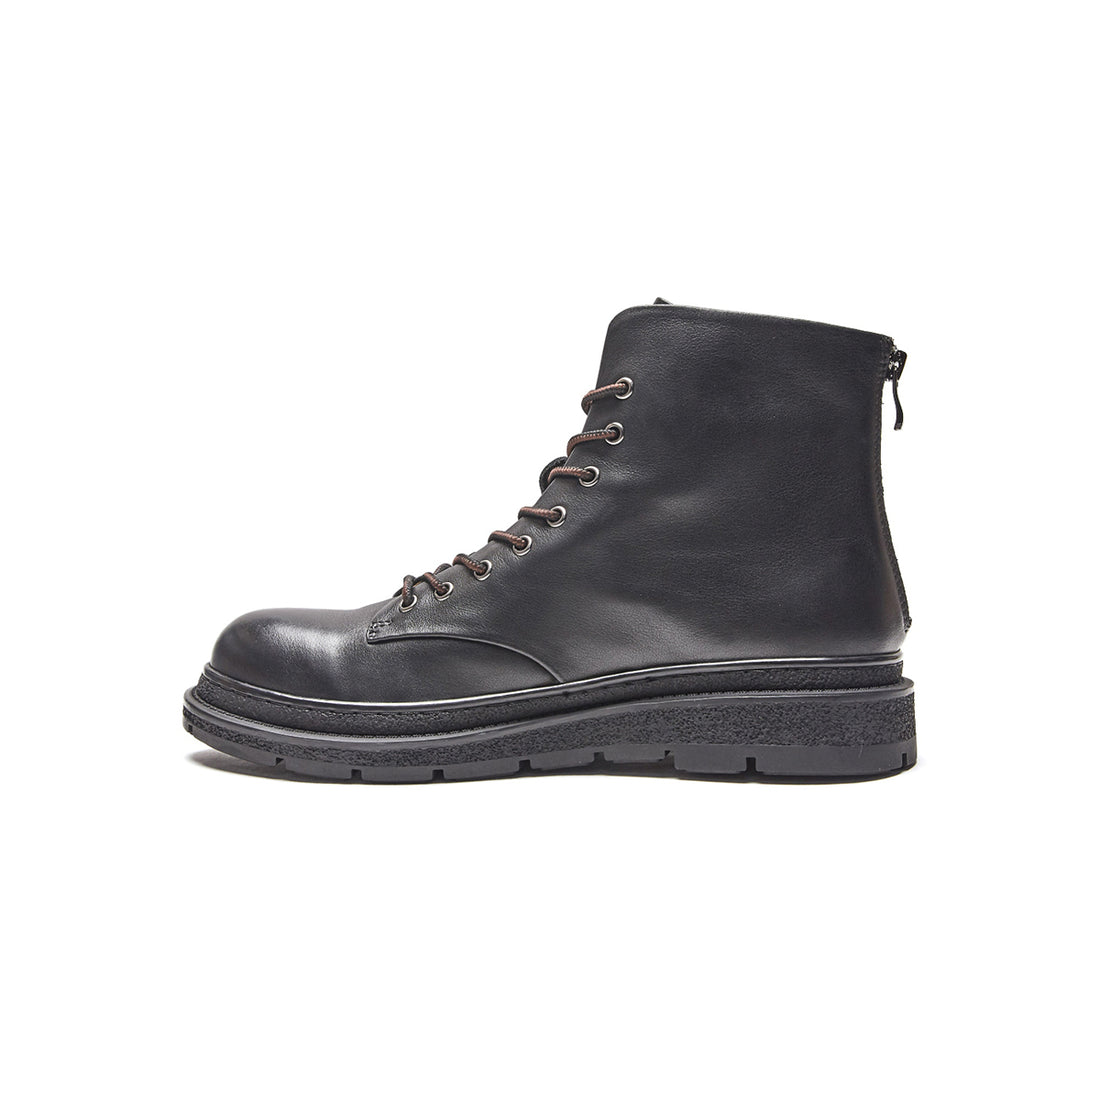 Slick Lace Up Black Leather Worker Boots